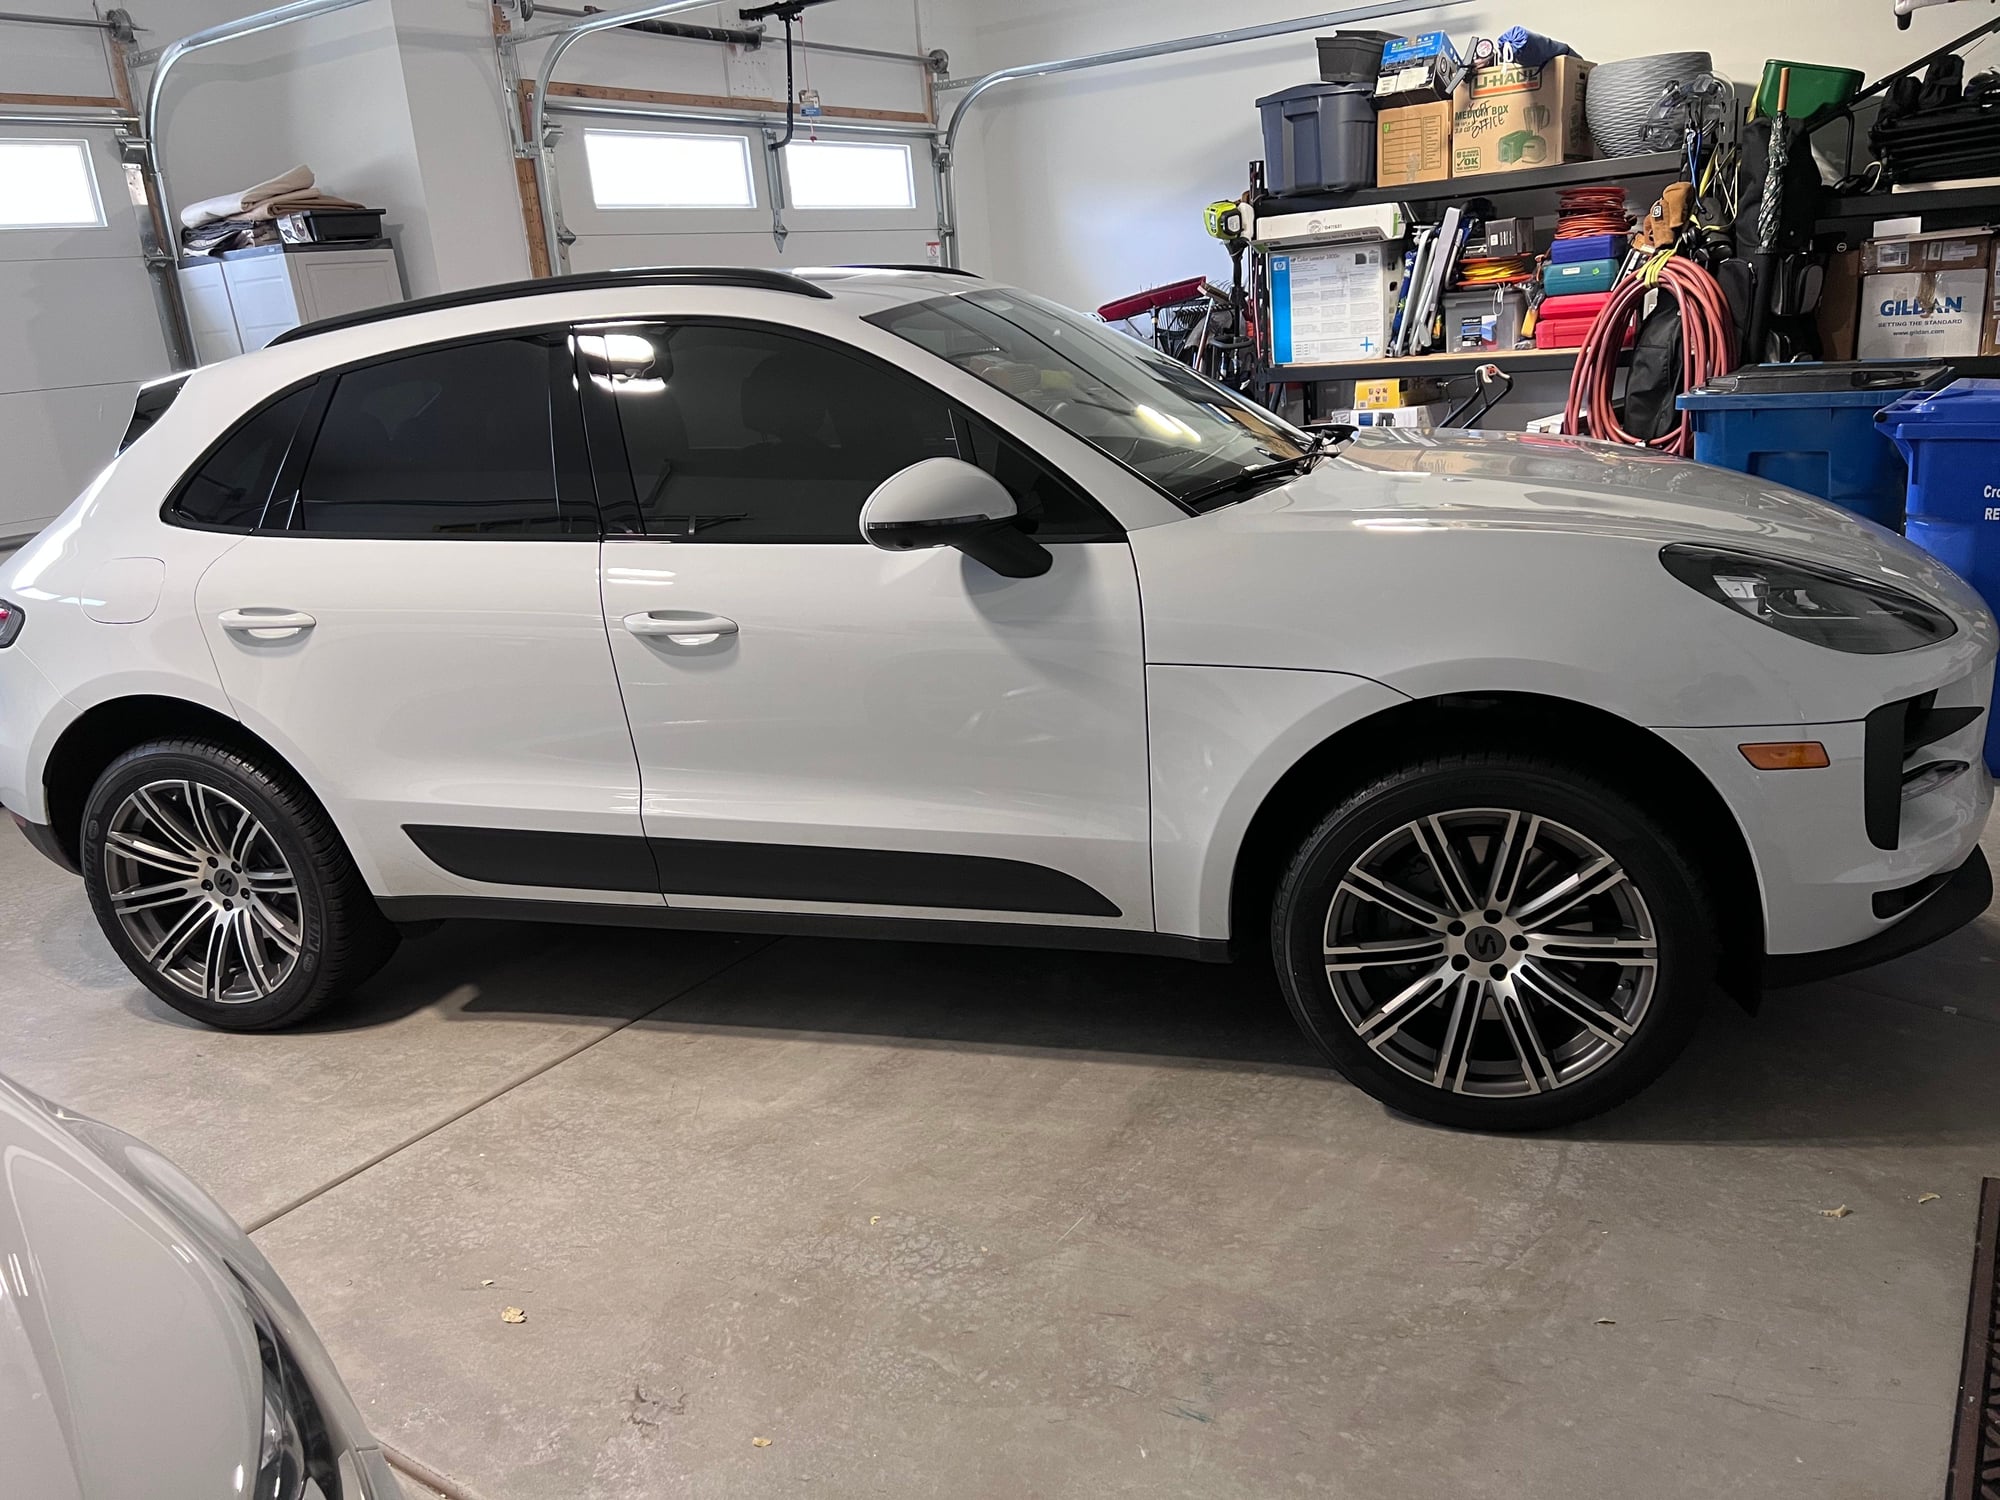 2021 Porsche Macan - Selling 2021 Macan S white w black interior - Used - VIN WP1AB2A56MLB35782 - 5,100 Miles - AWD - Automatic - SUV - White - Crown Point, IN 46307, United States